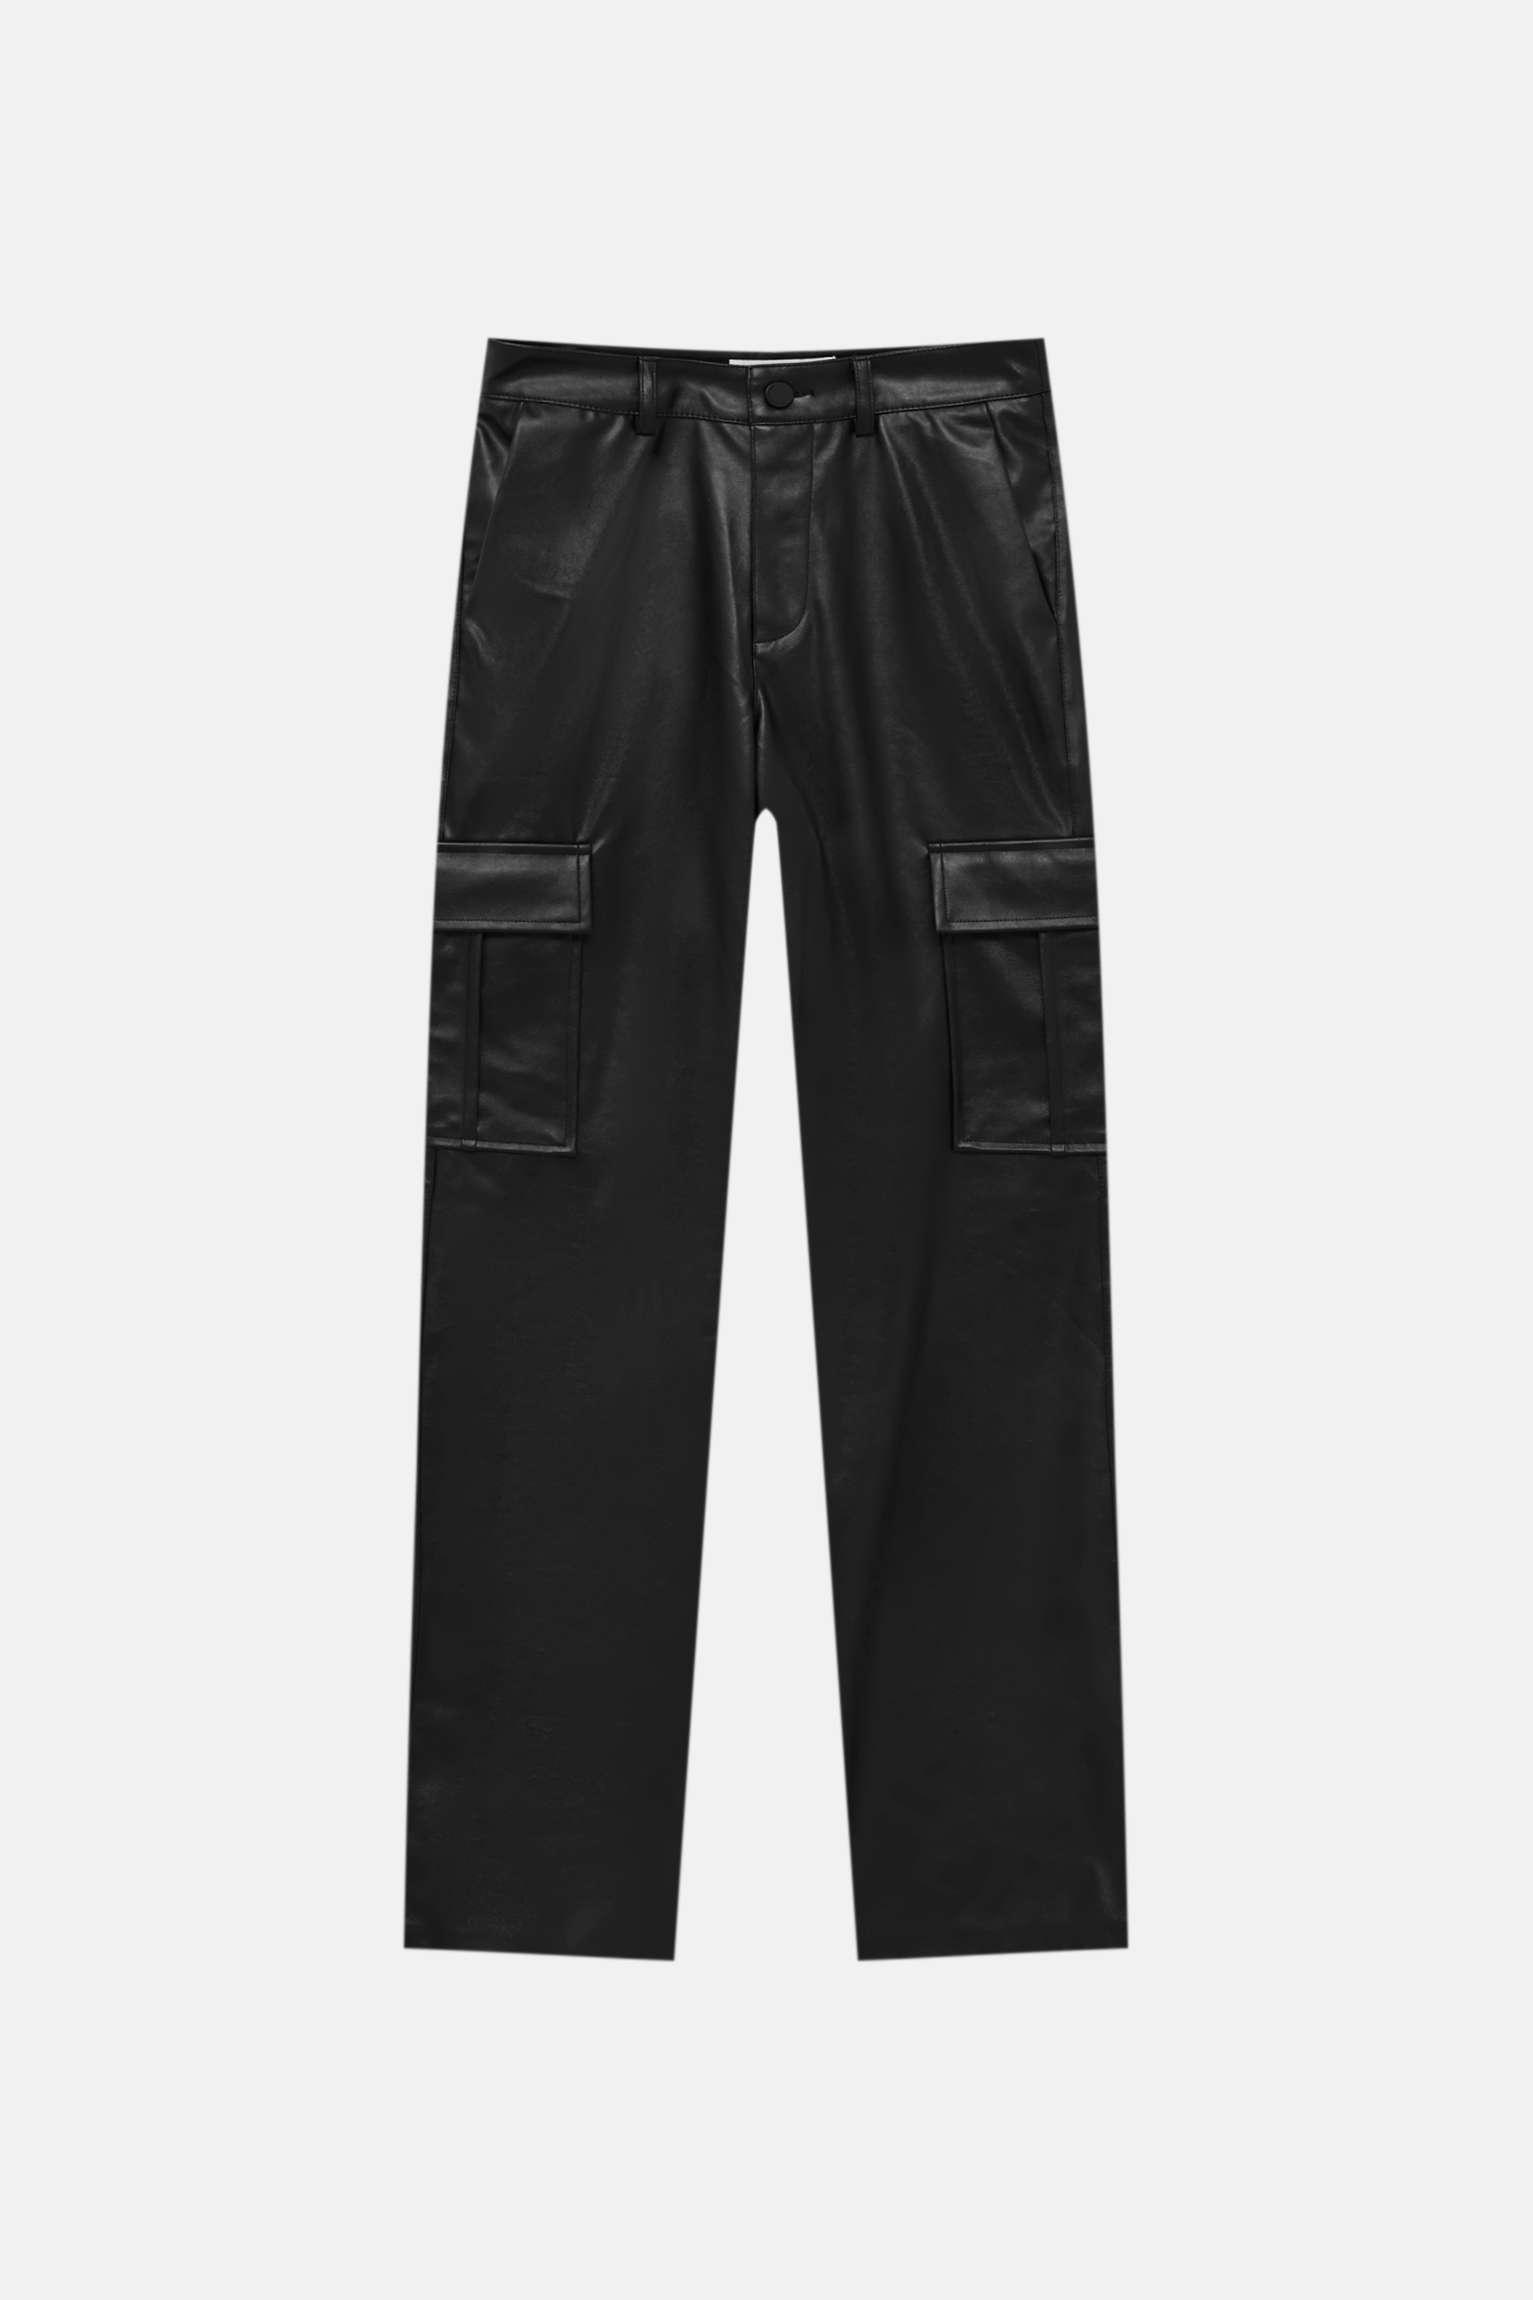 Dark Chocolate Faux Leather Cargo Trousers  PrettyLittleThing